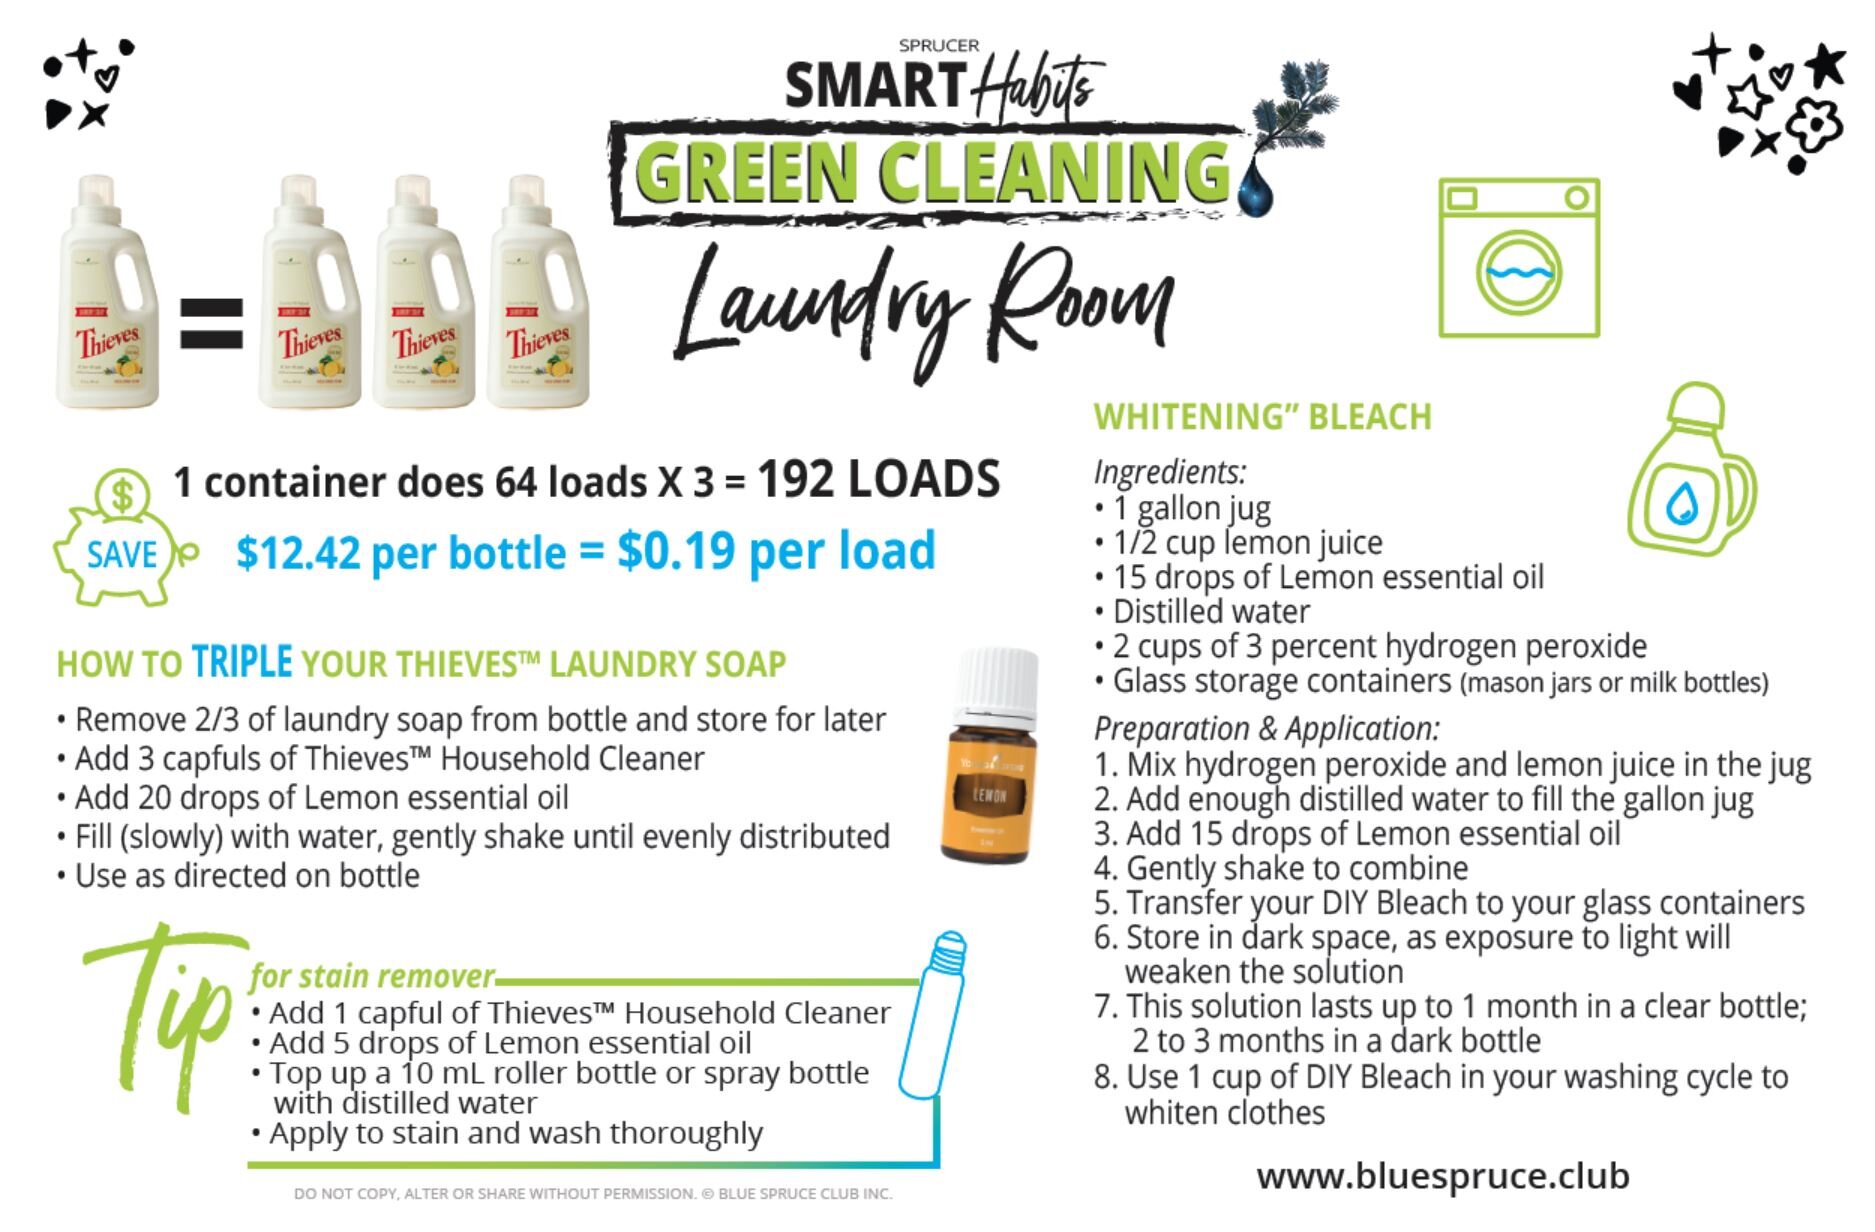 SMART HABITS_Green Up Clean Up_Laundry Room.jpg